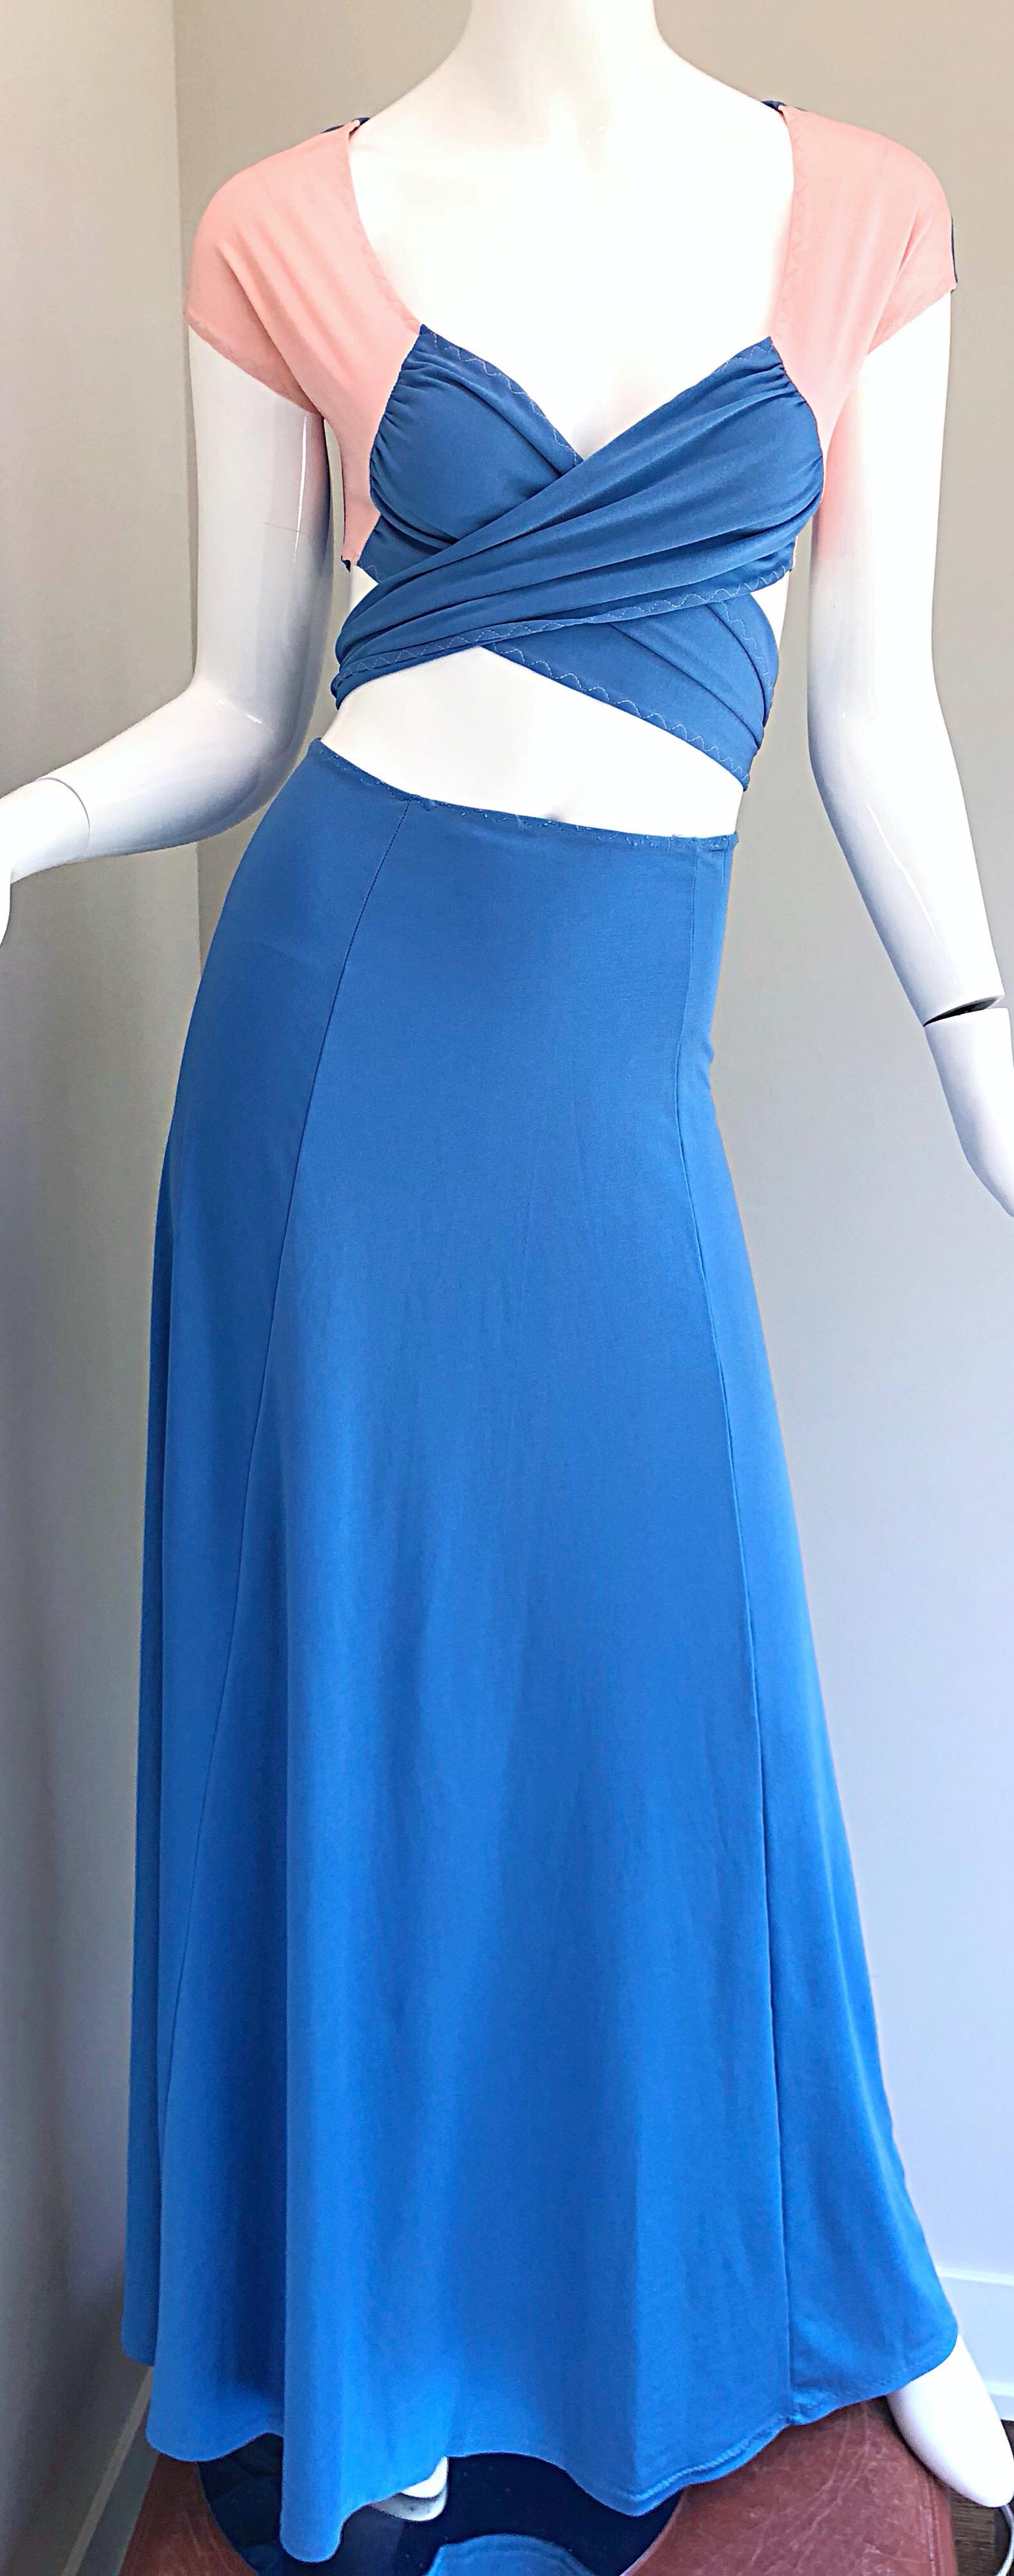 1970s M. Bassel Blue + Light Pink Vintage Wrap Crop Top Shirt and Maxi Skirt For Sale 7